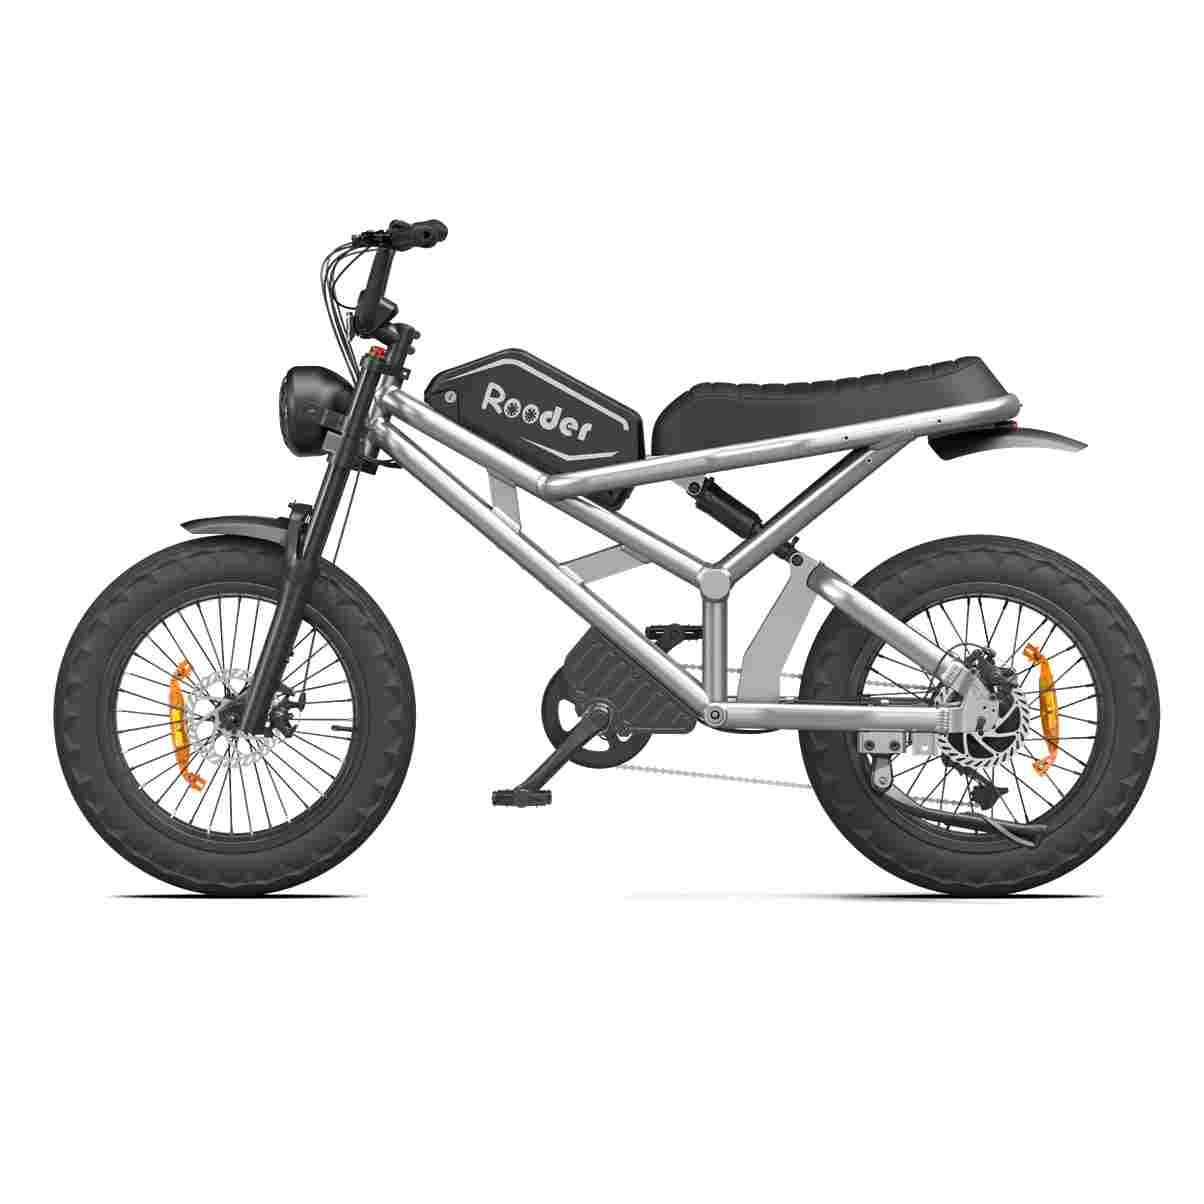 Most Powerful Electric Dirt Bike factory